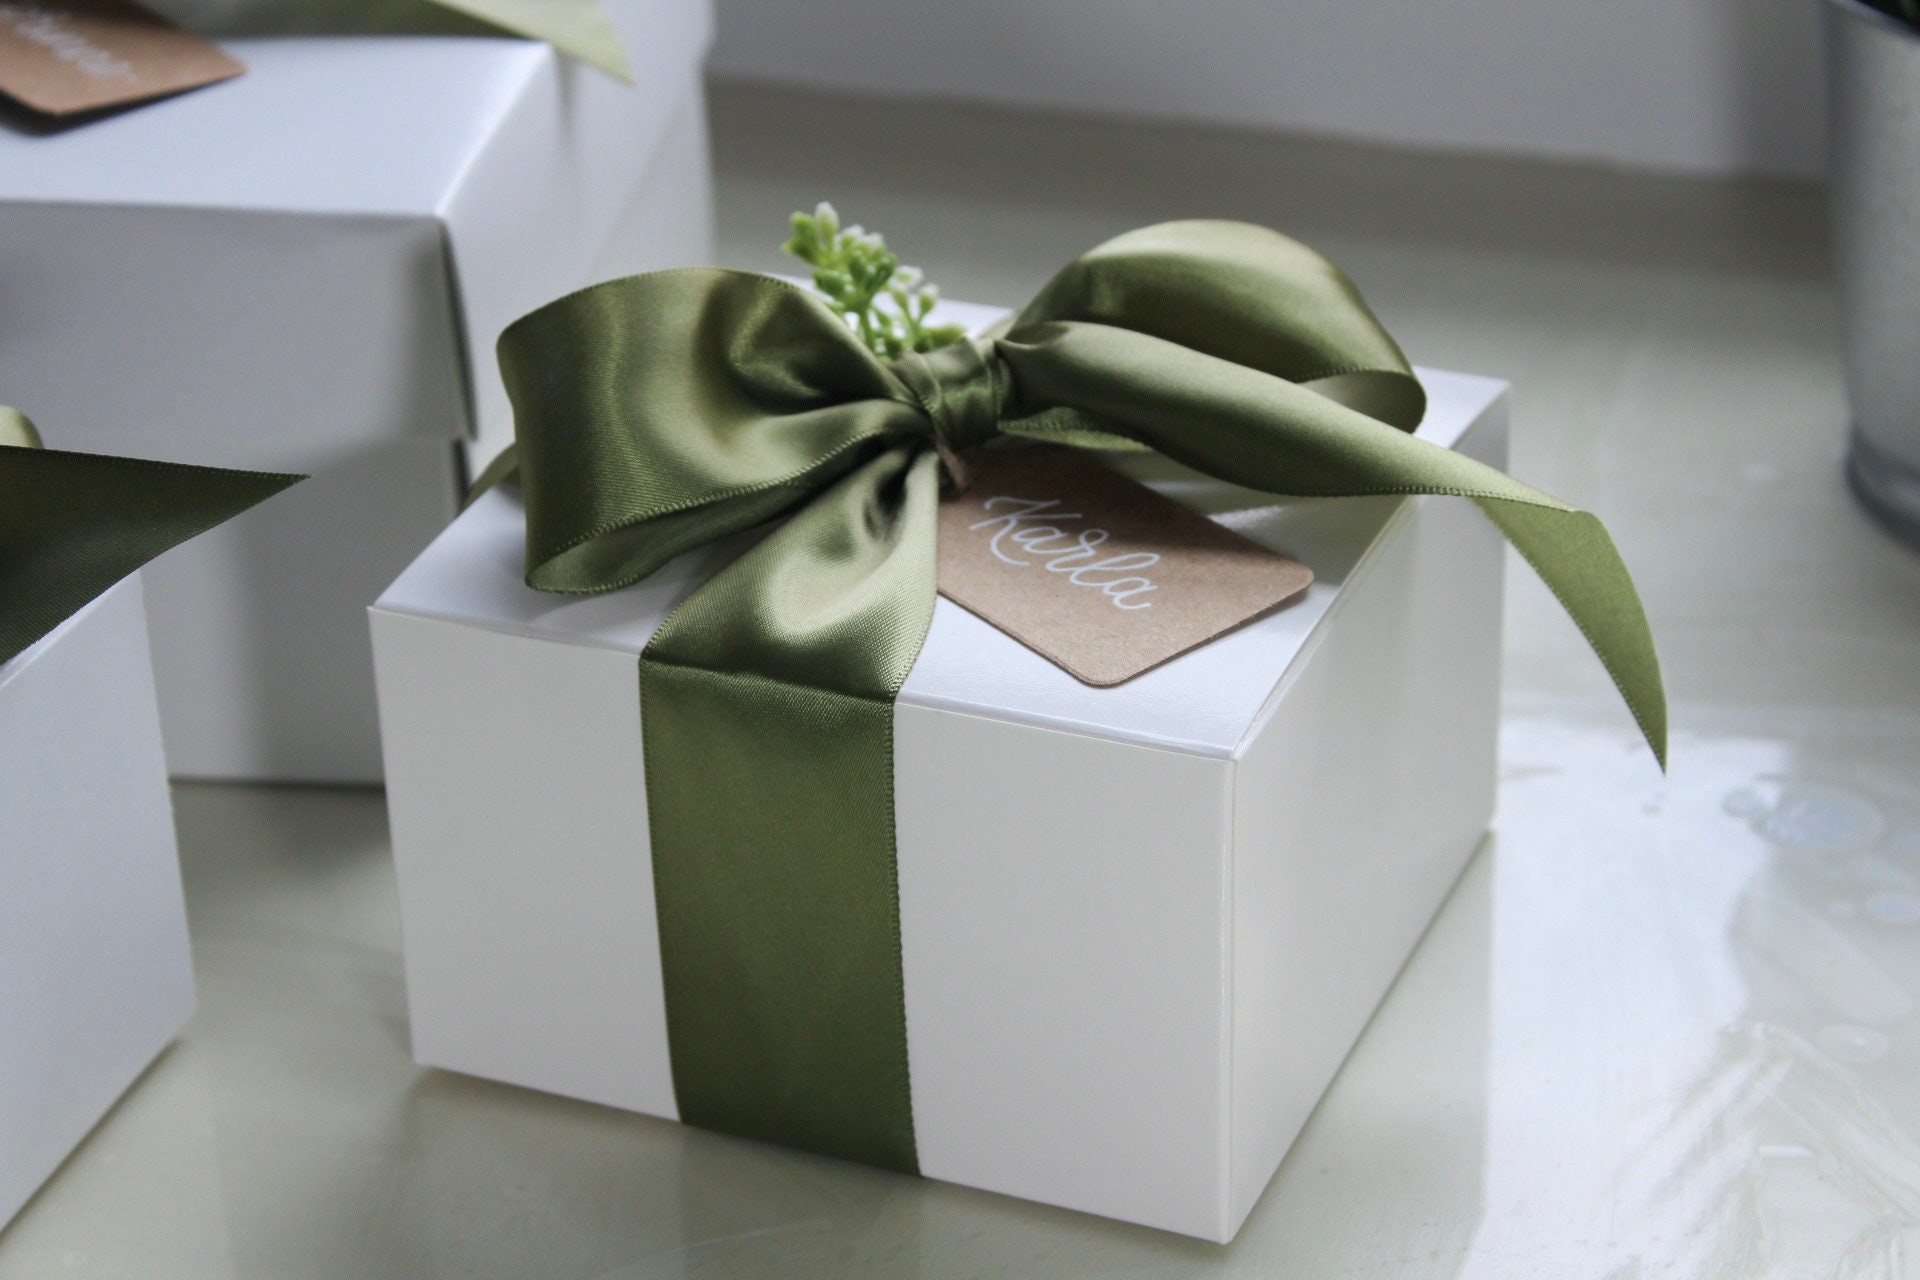 Green and Neutral Holiday Gift Wrap Inspiration  Elegant gift wrapping,  Cute gift wrapping ideas, Gift wrapping inspiration